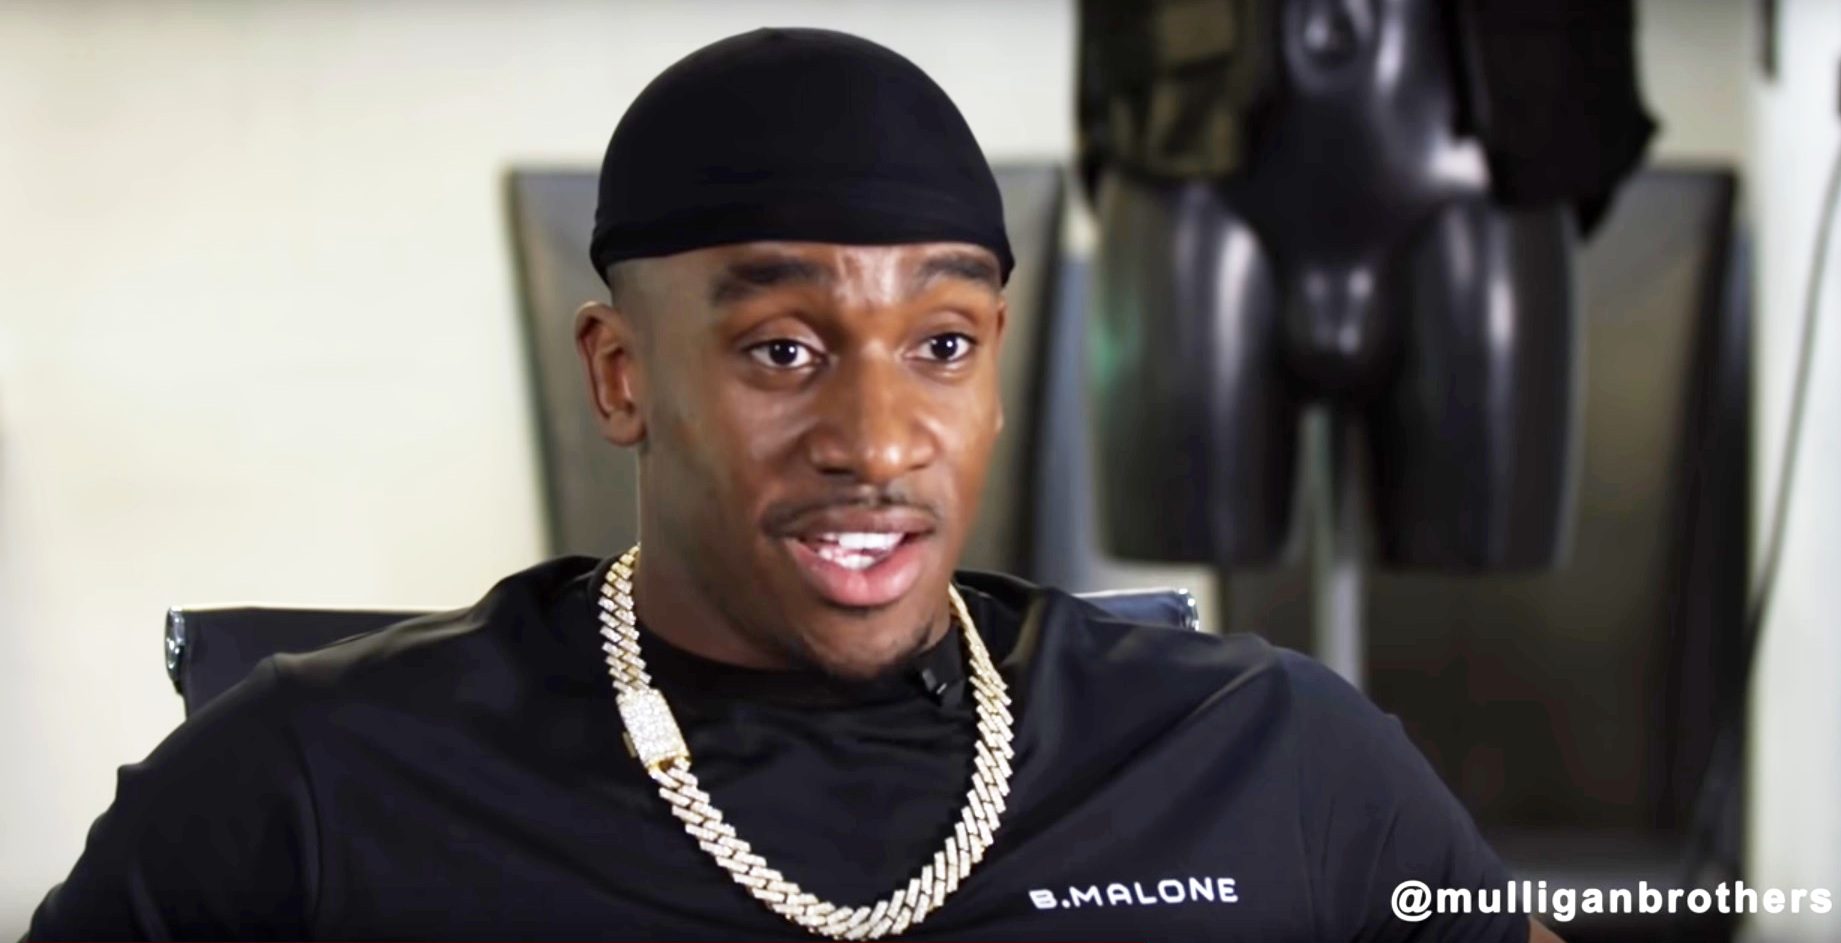 Bugzy Malone interview: 'I just don't want to go back to where I